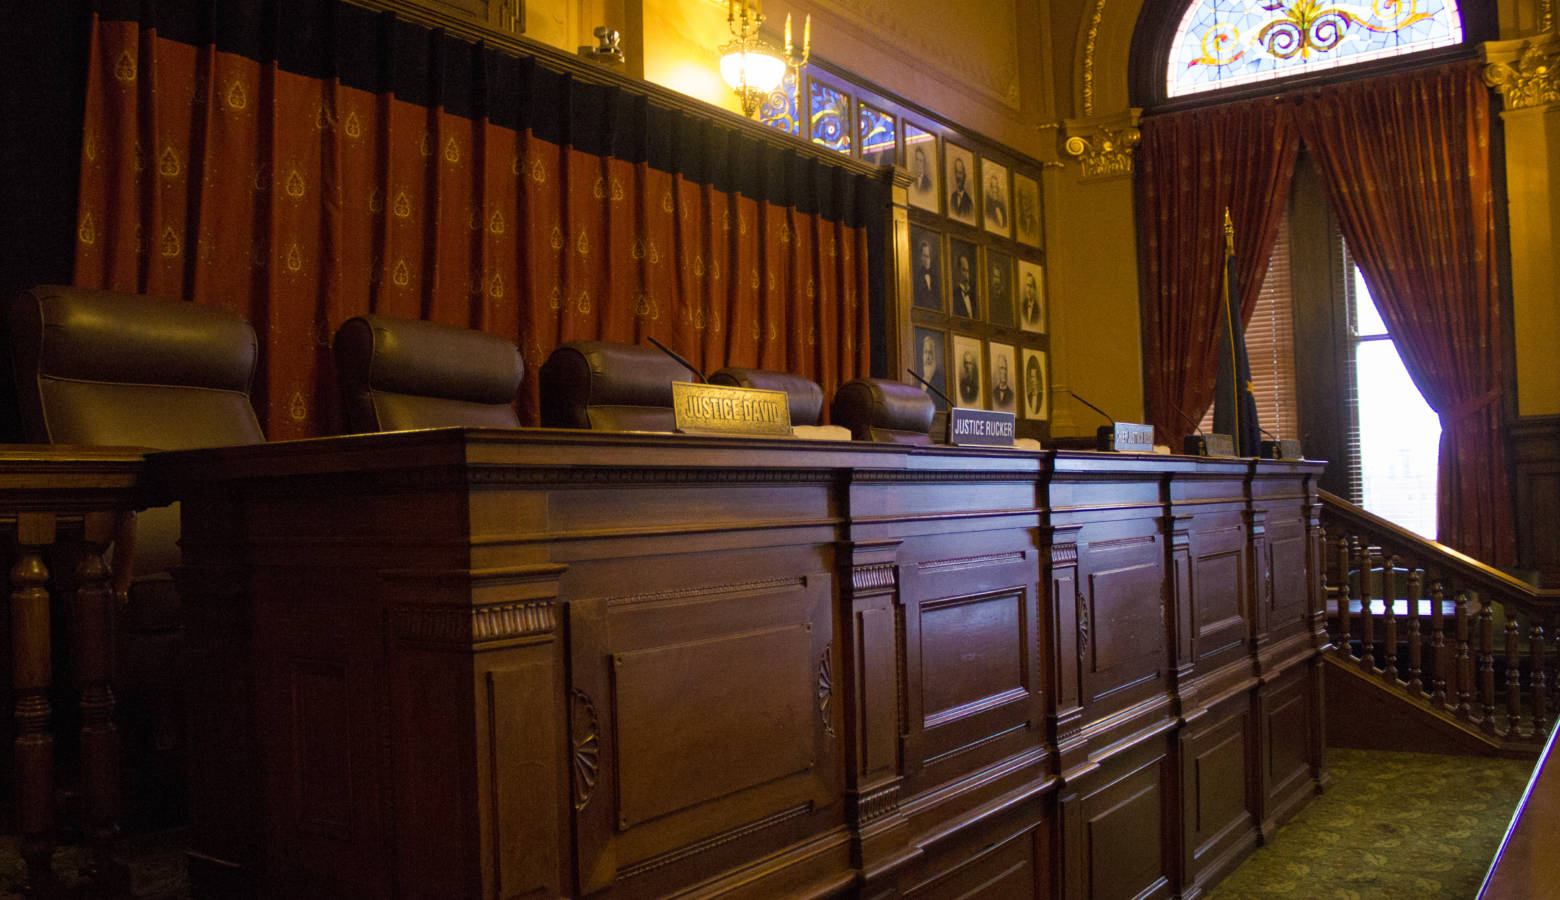 The Indiana Supreme Court Chamber in the Statehouse. (Brandon Smith/IPB News)